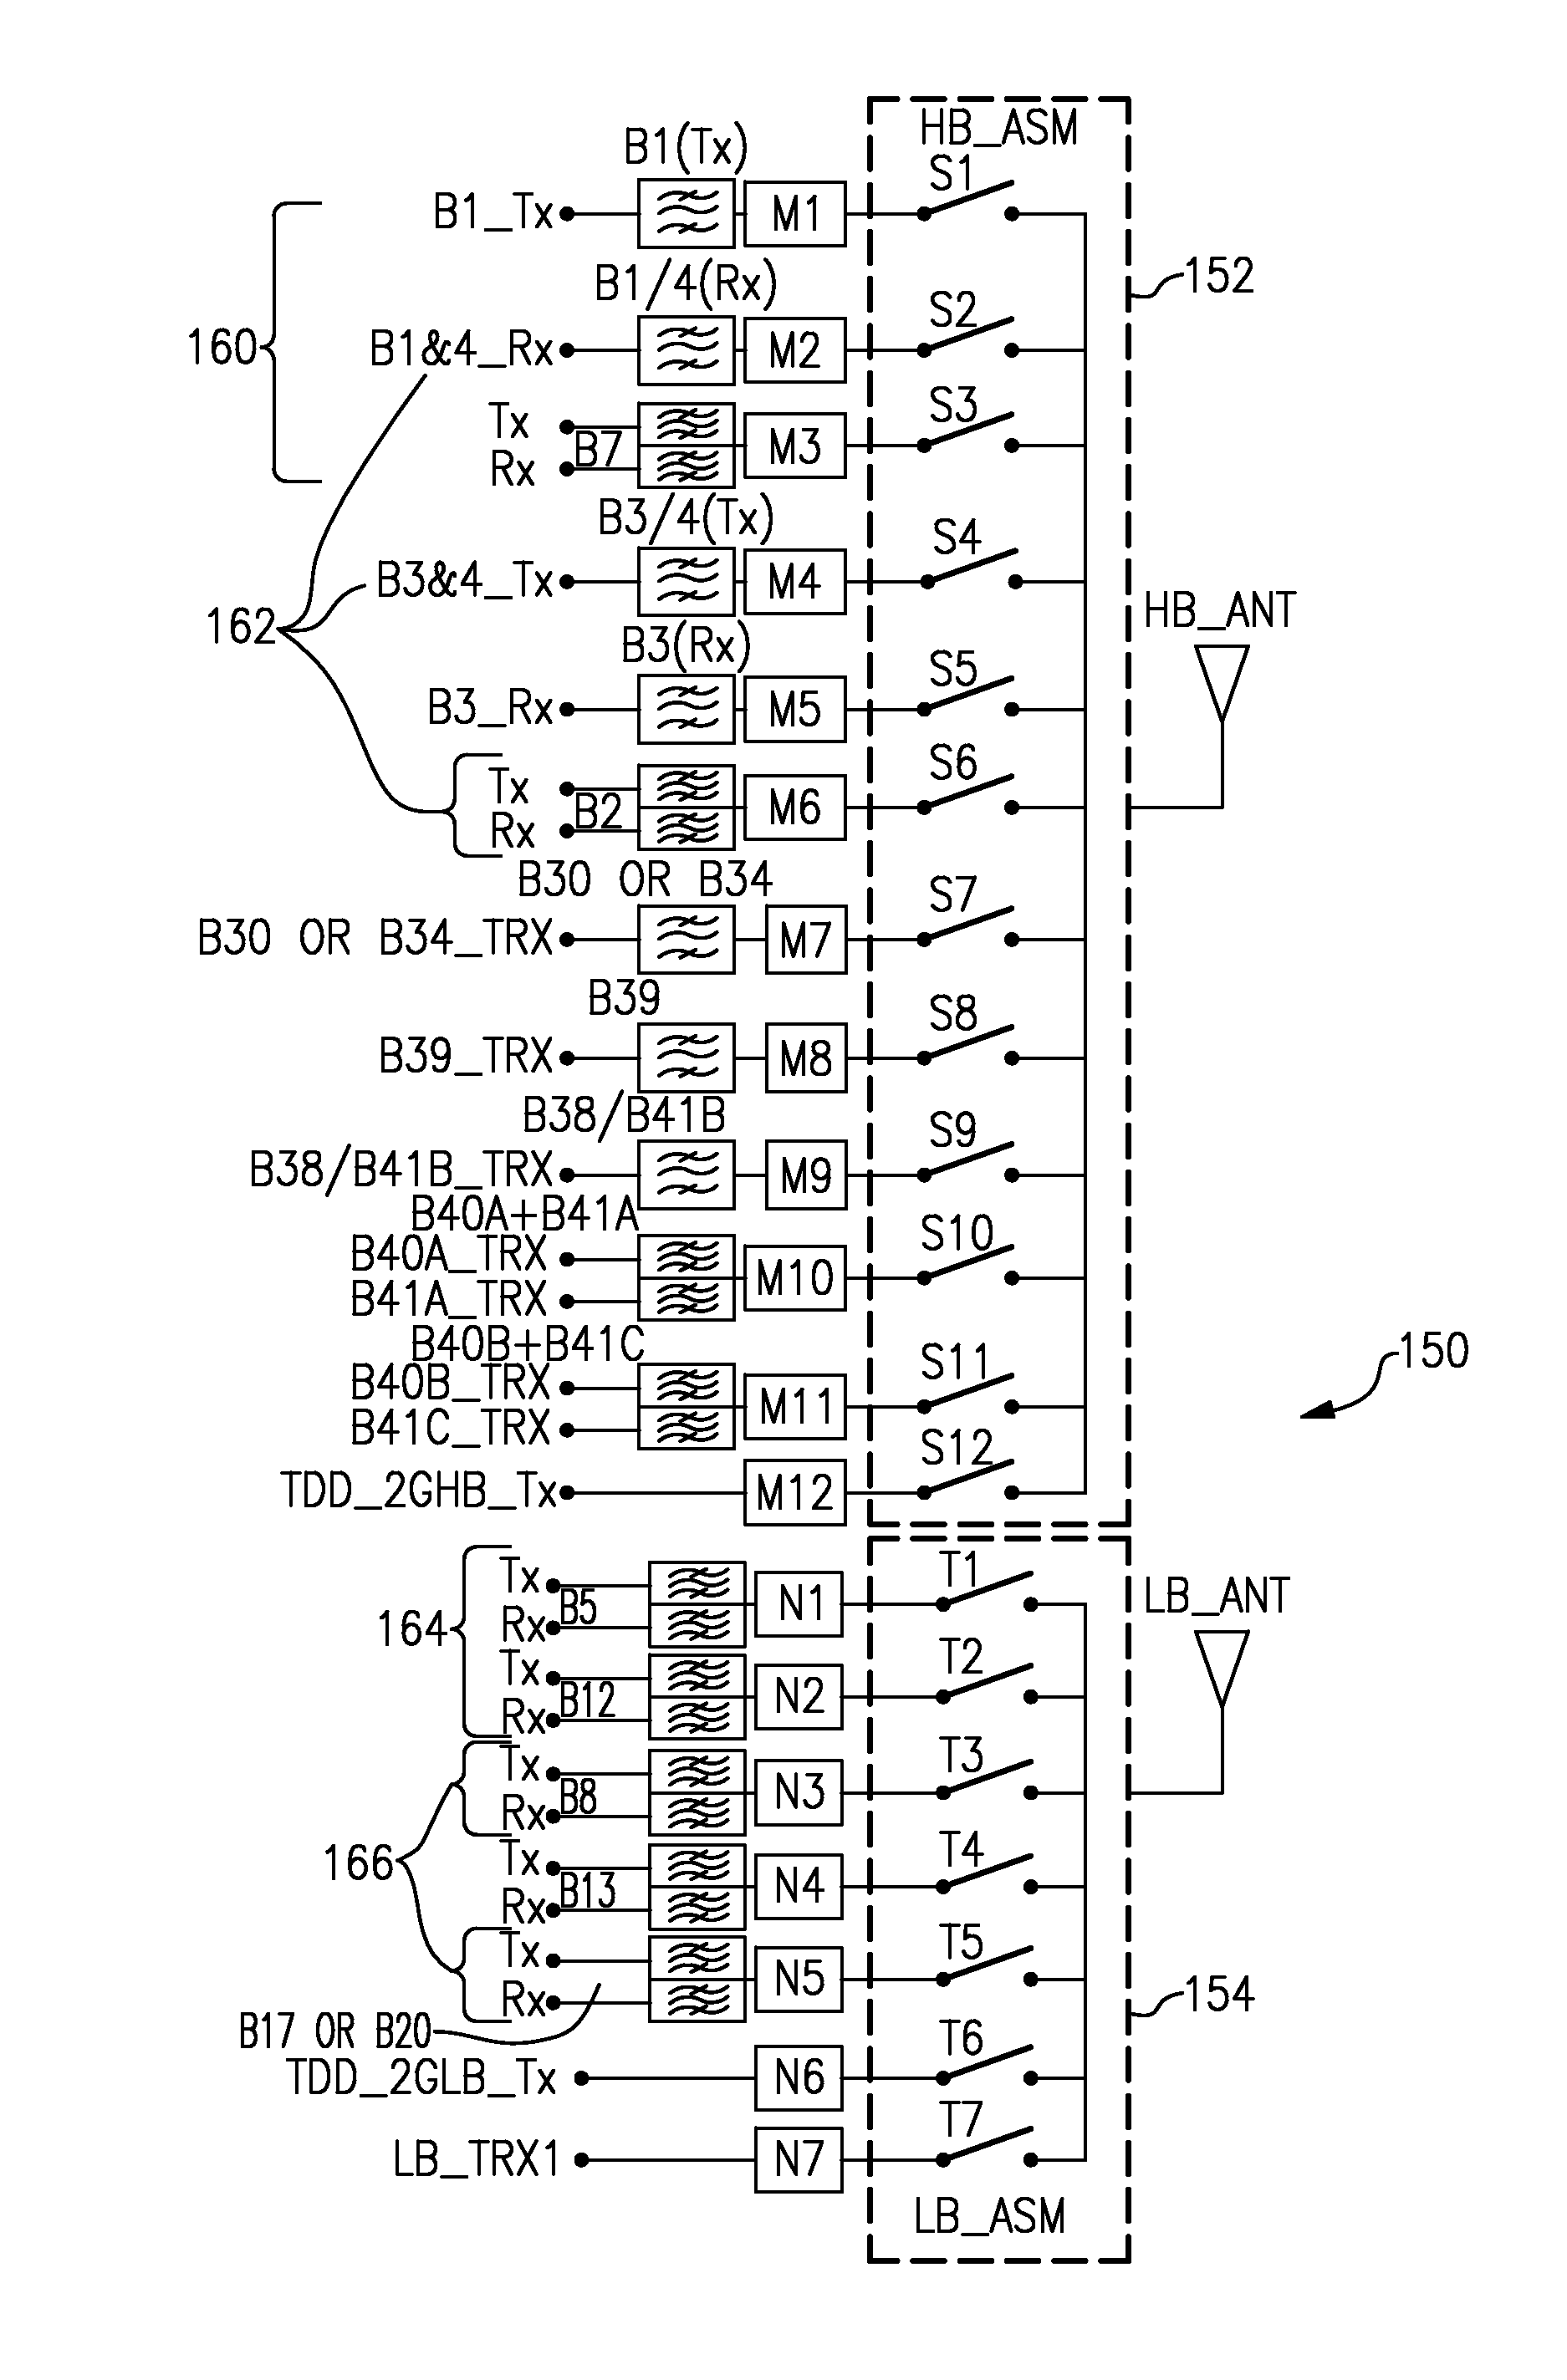 Systems and methods related to carrier aggregation front-end module applications